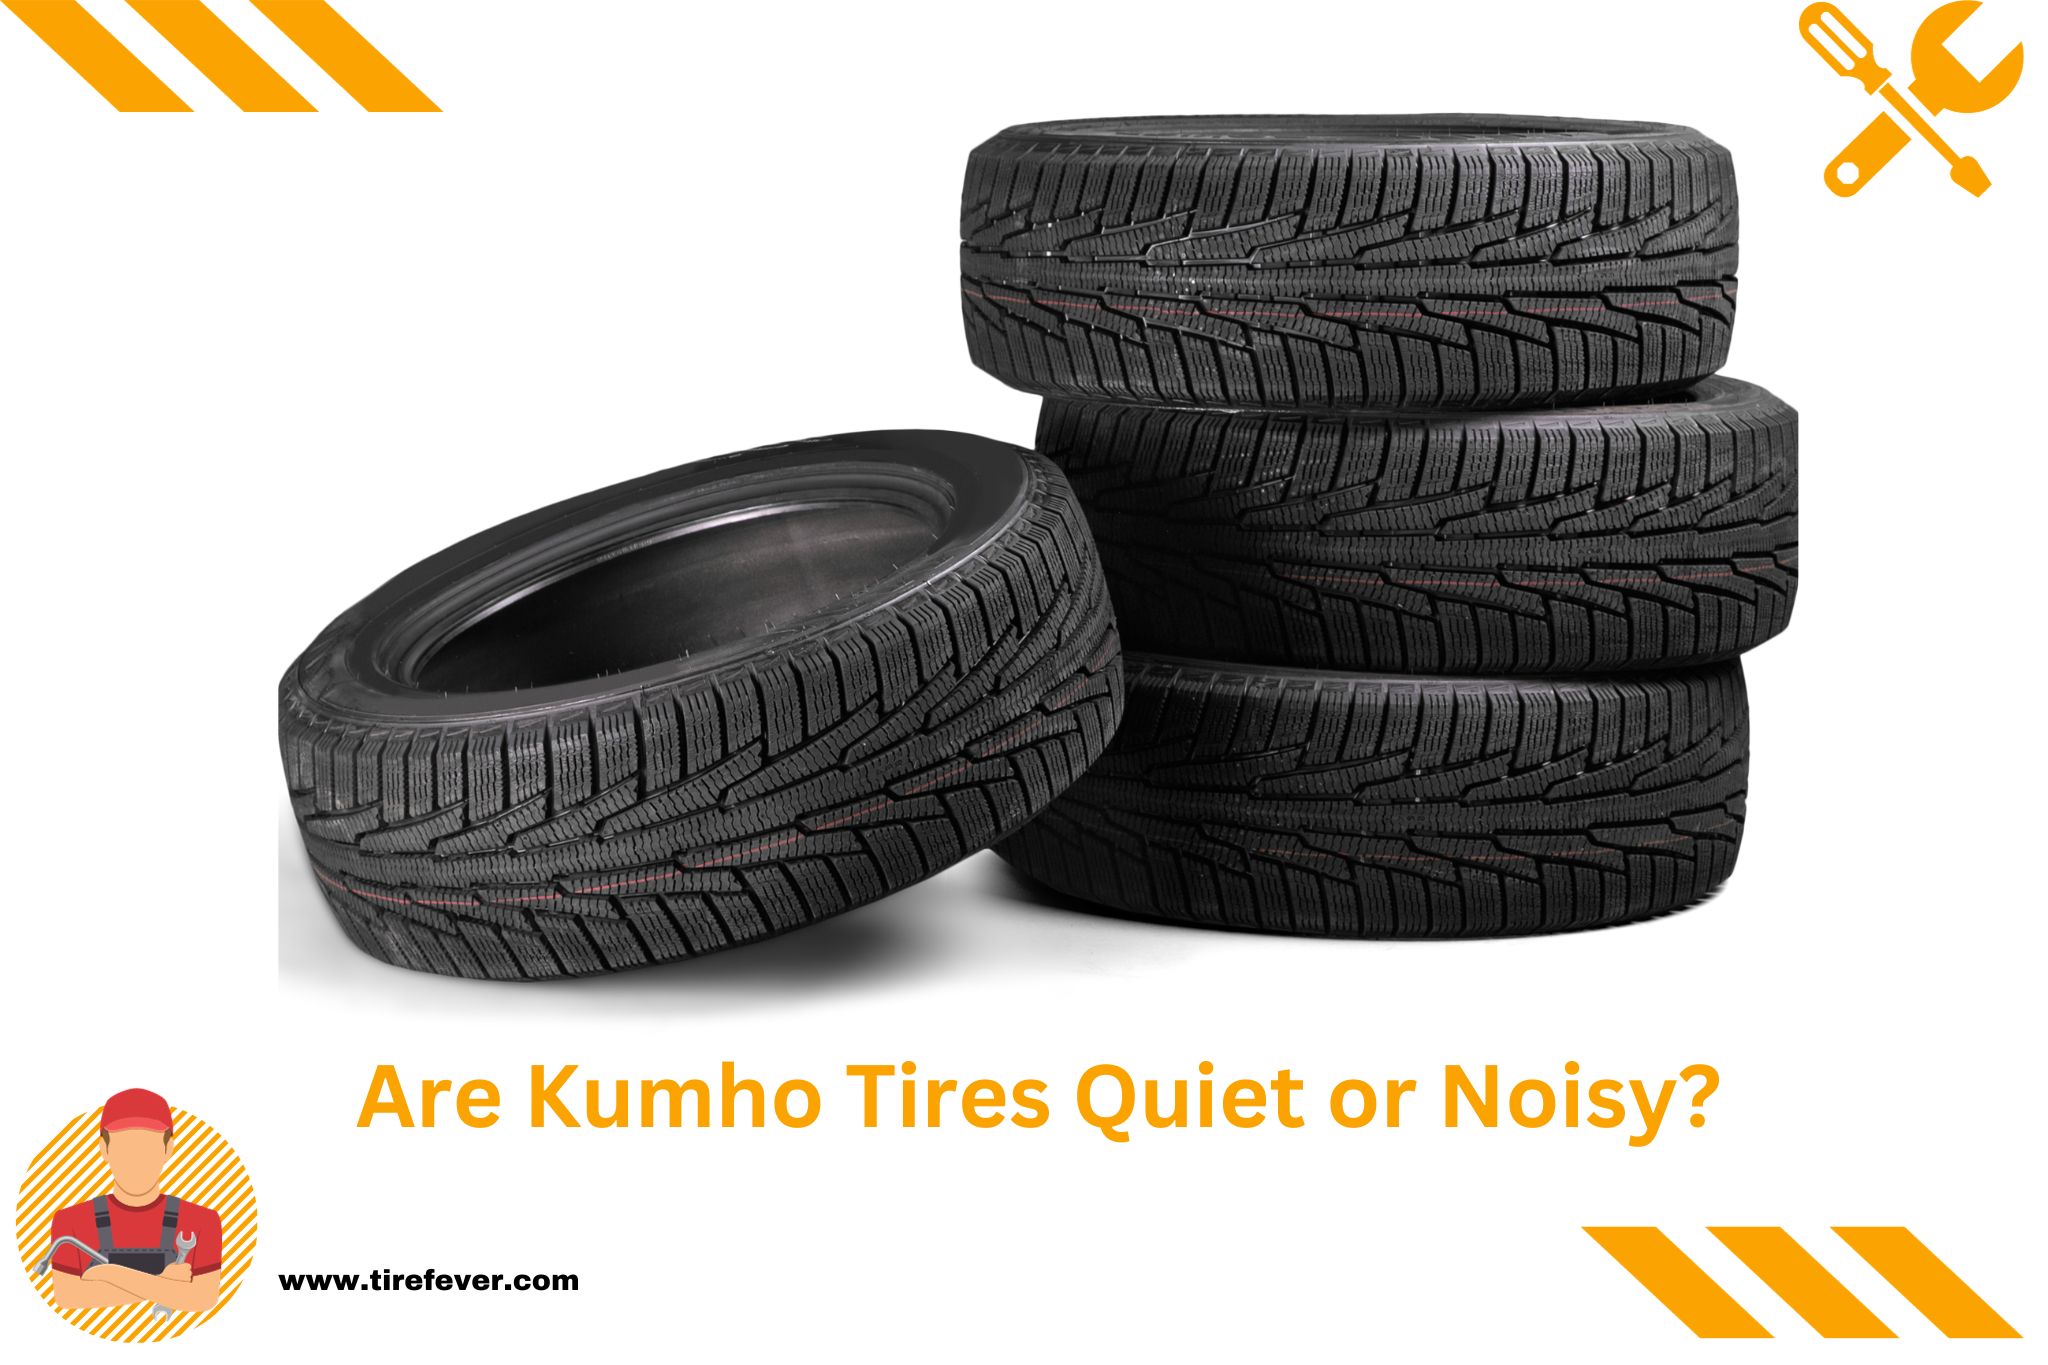 Are Kumho Tires Quiet or Noisy?